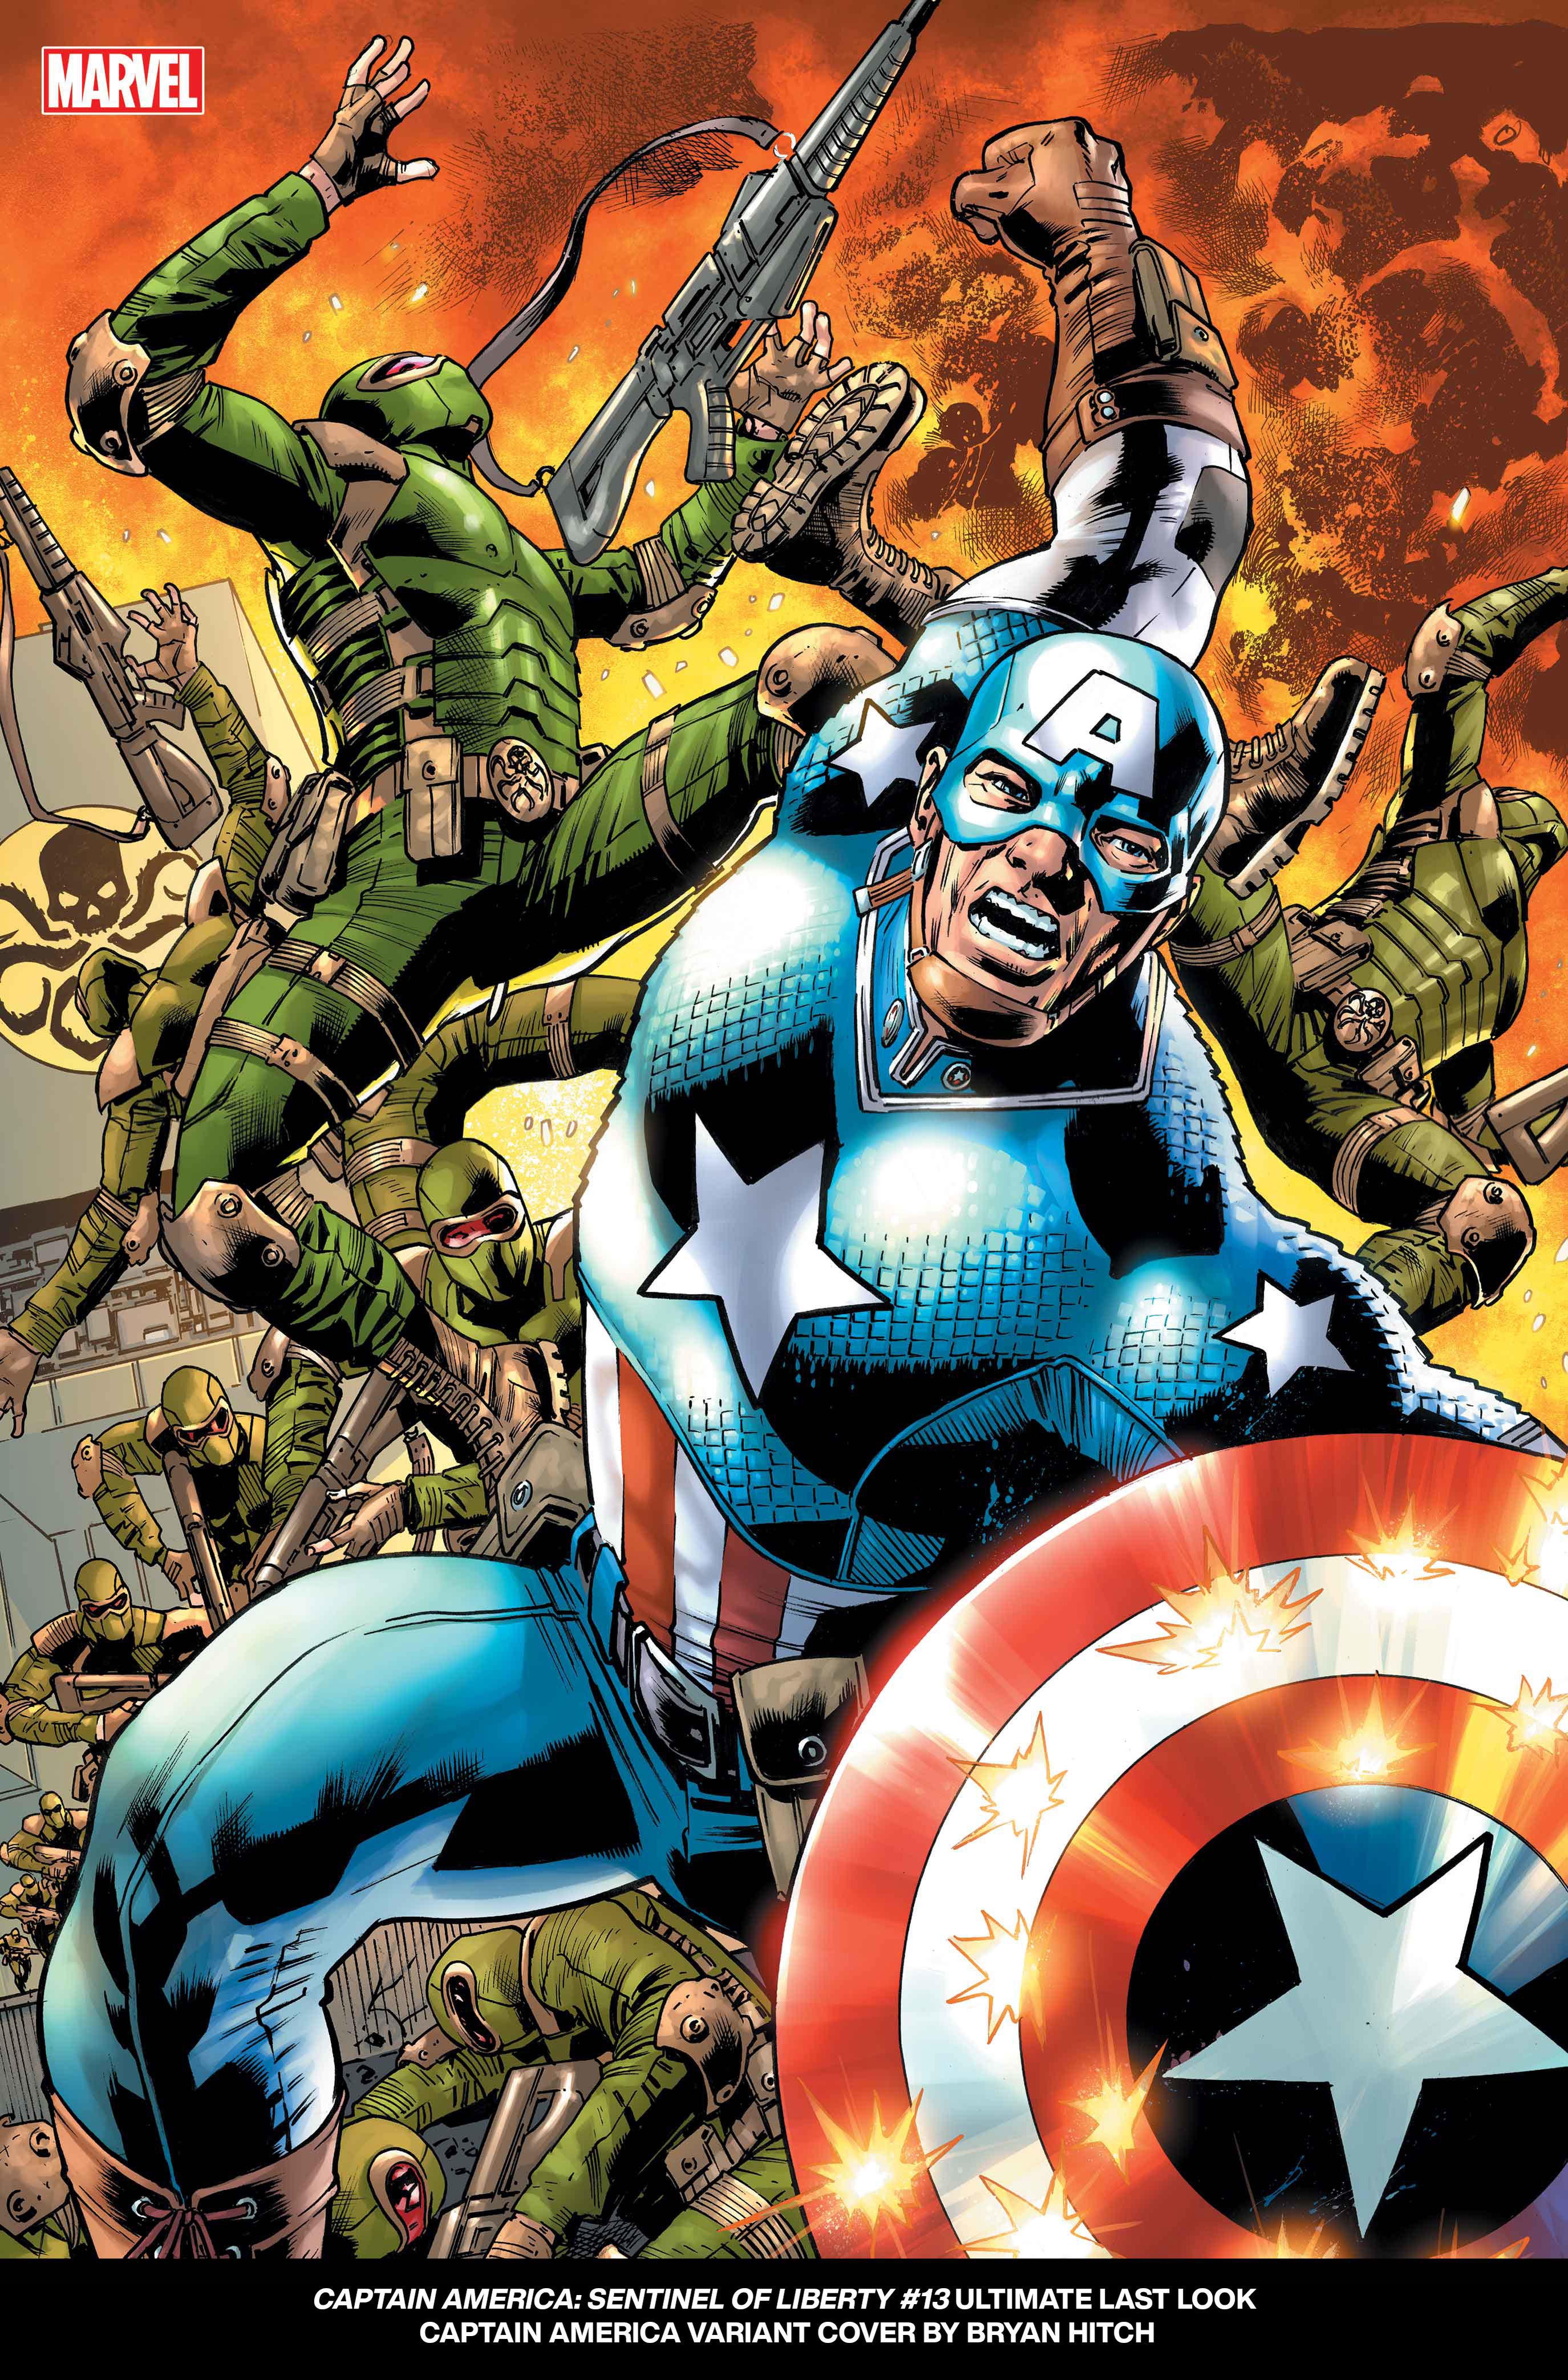 Marvel Variant Covers Feature Ultimate Universe Versions of Your Favorite Heroes